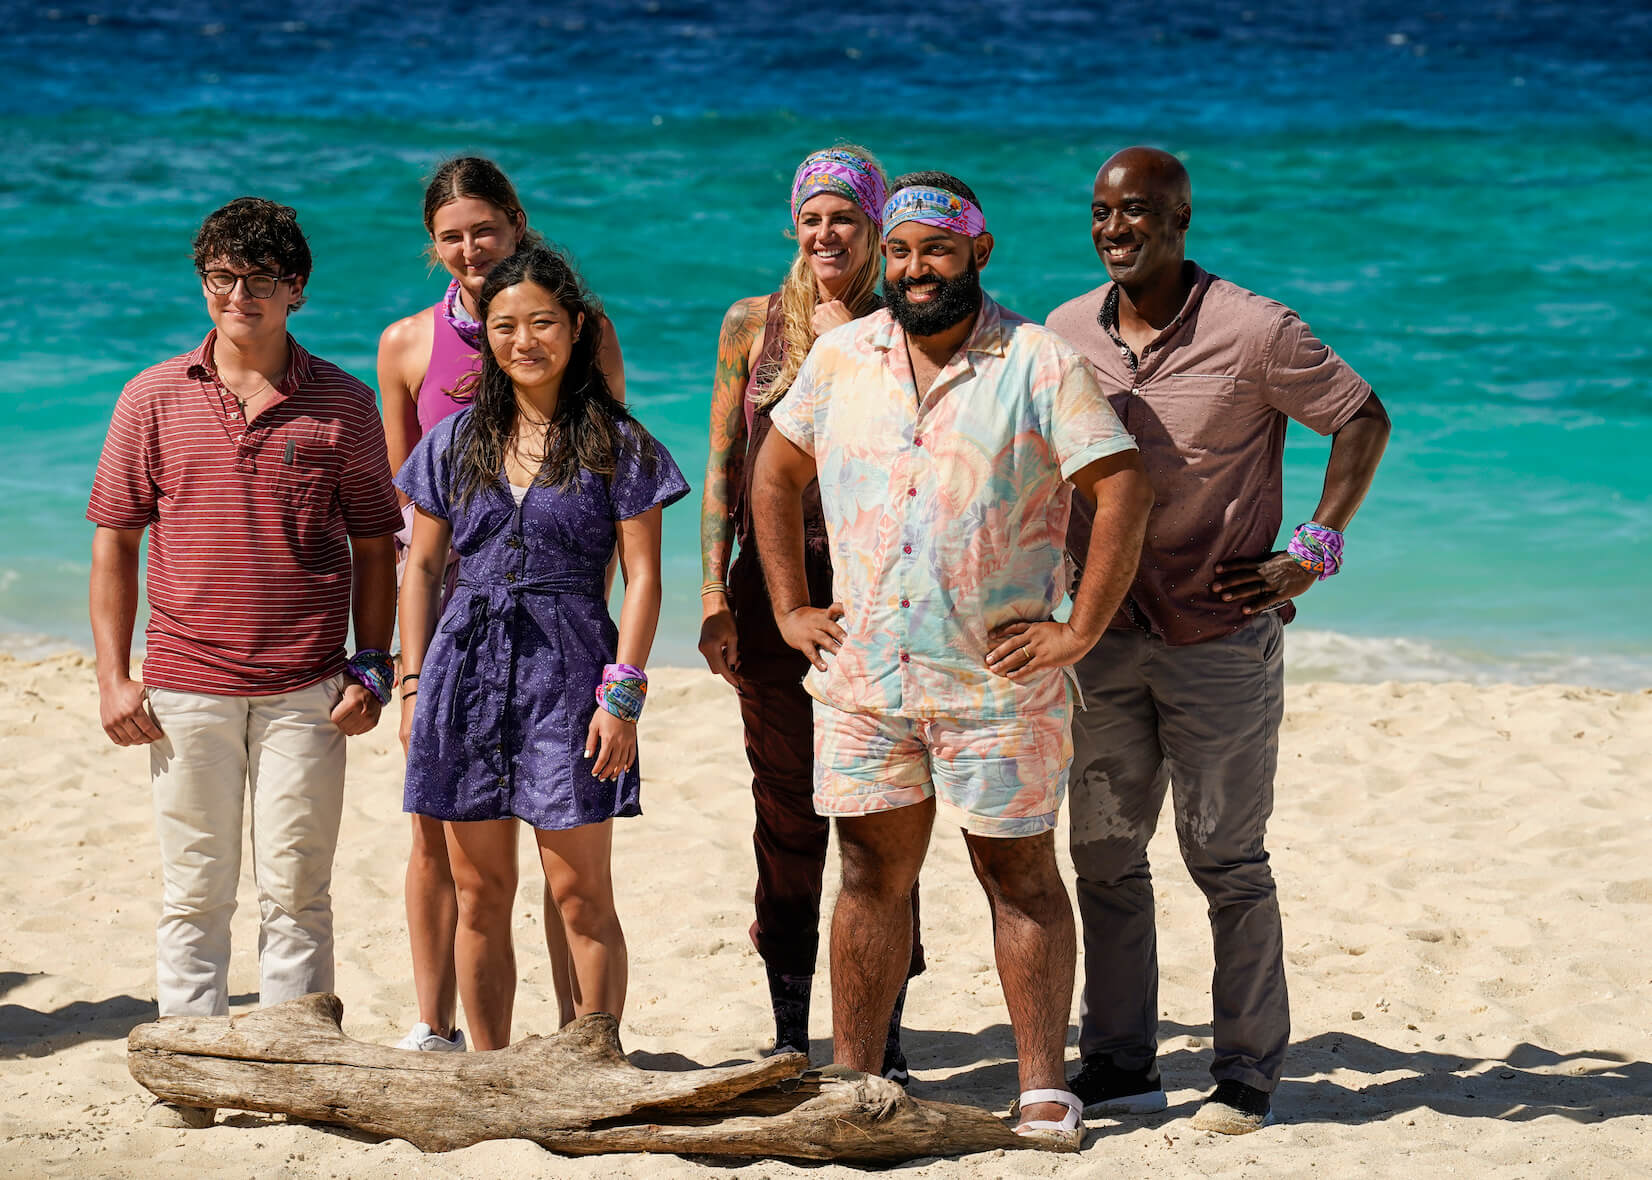 Survivor 45' cast explains why they will win the season